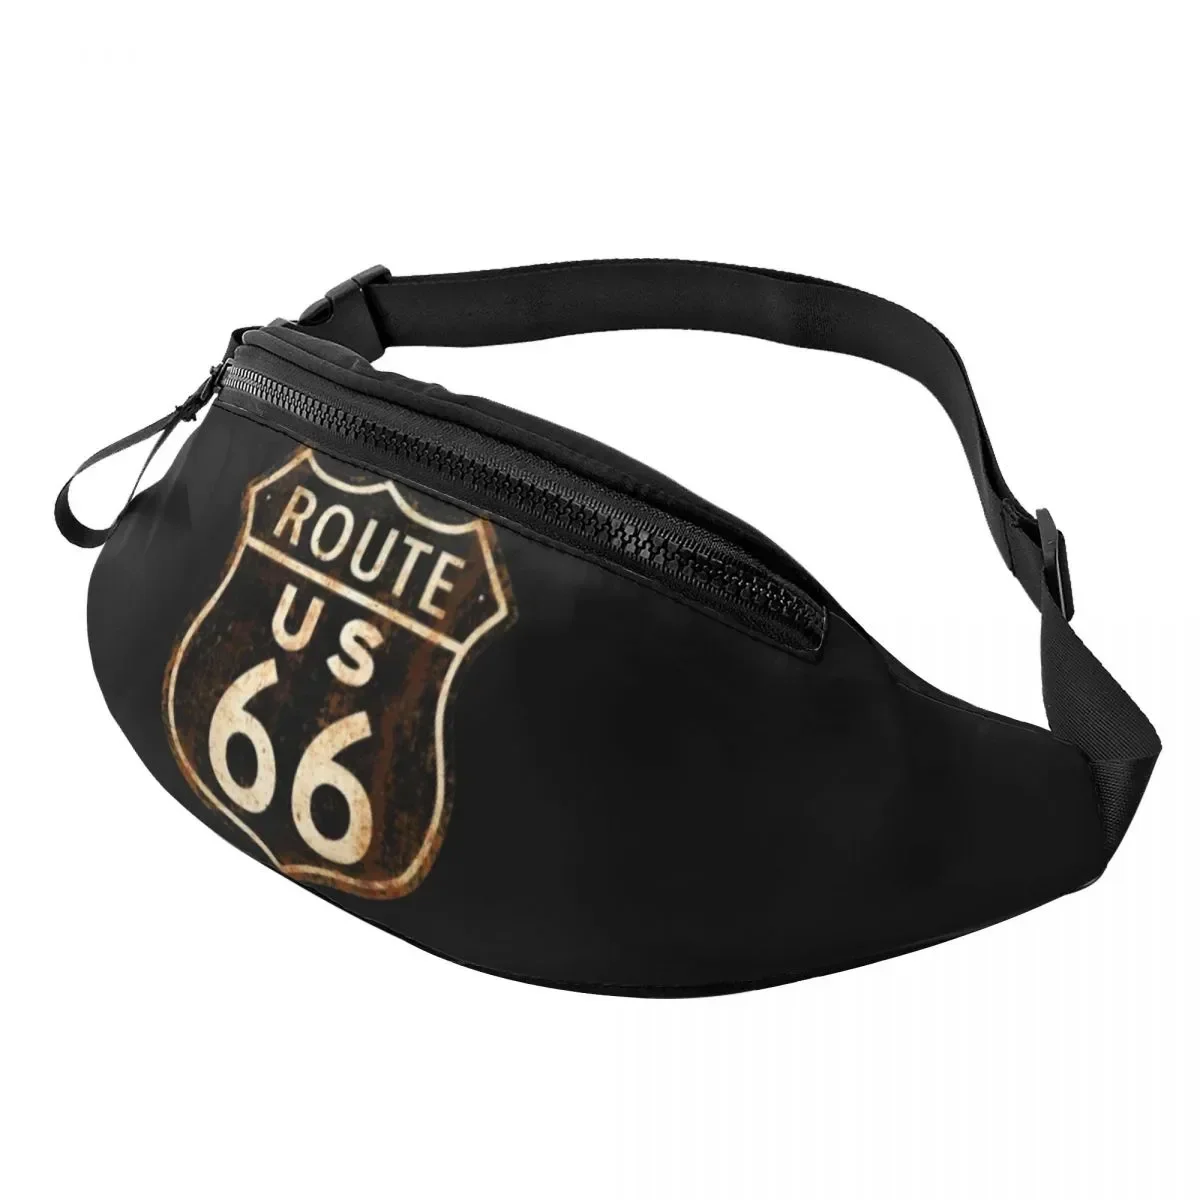 

Personalized US Route 66 Fanny Pack for Women Men Fashion California Sign Crossbody Waist Bag Travel Hiking Phone Money Pouch